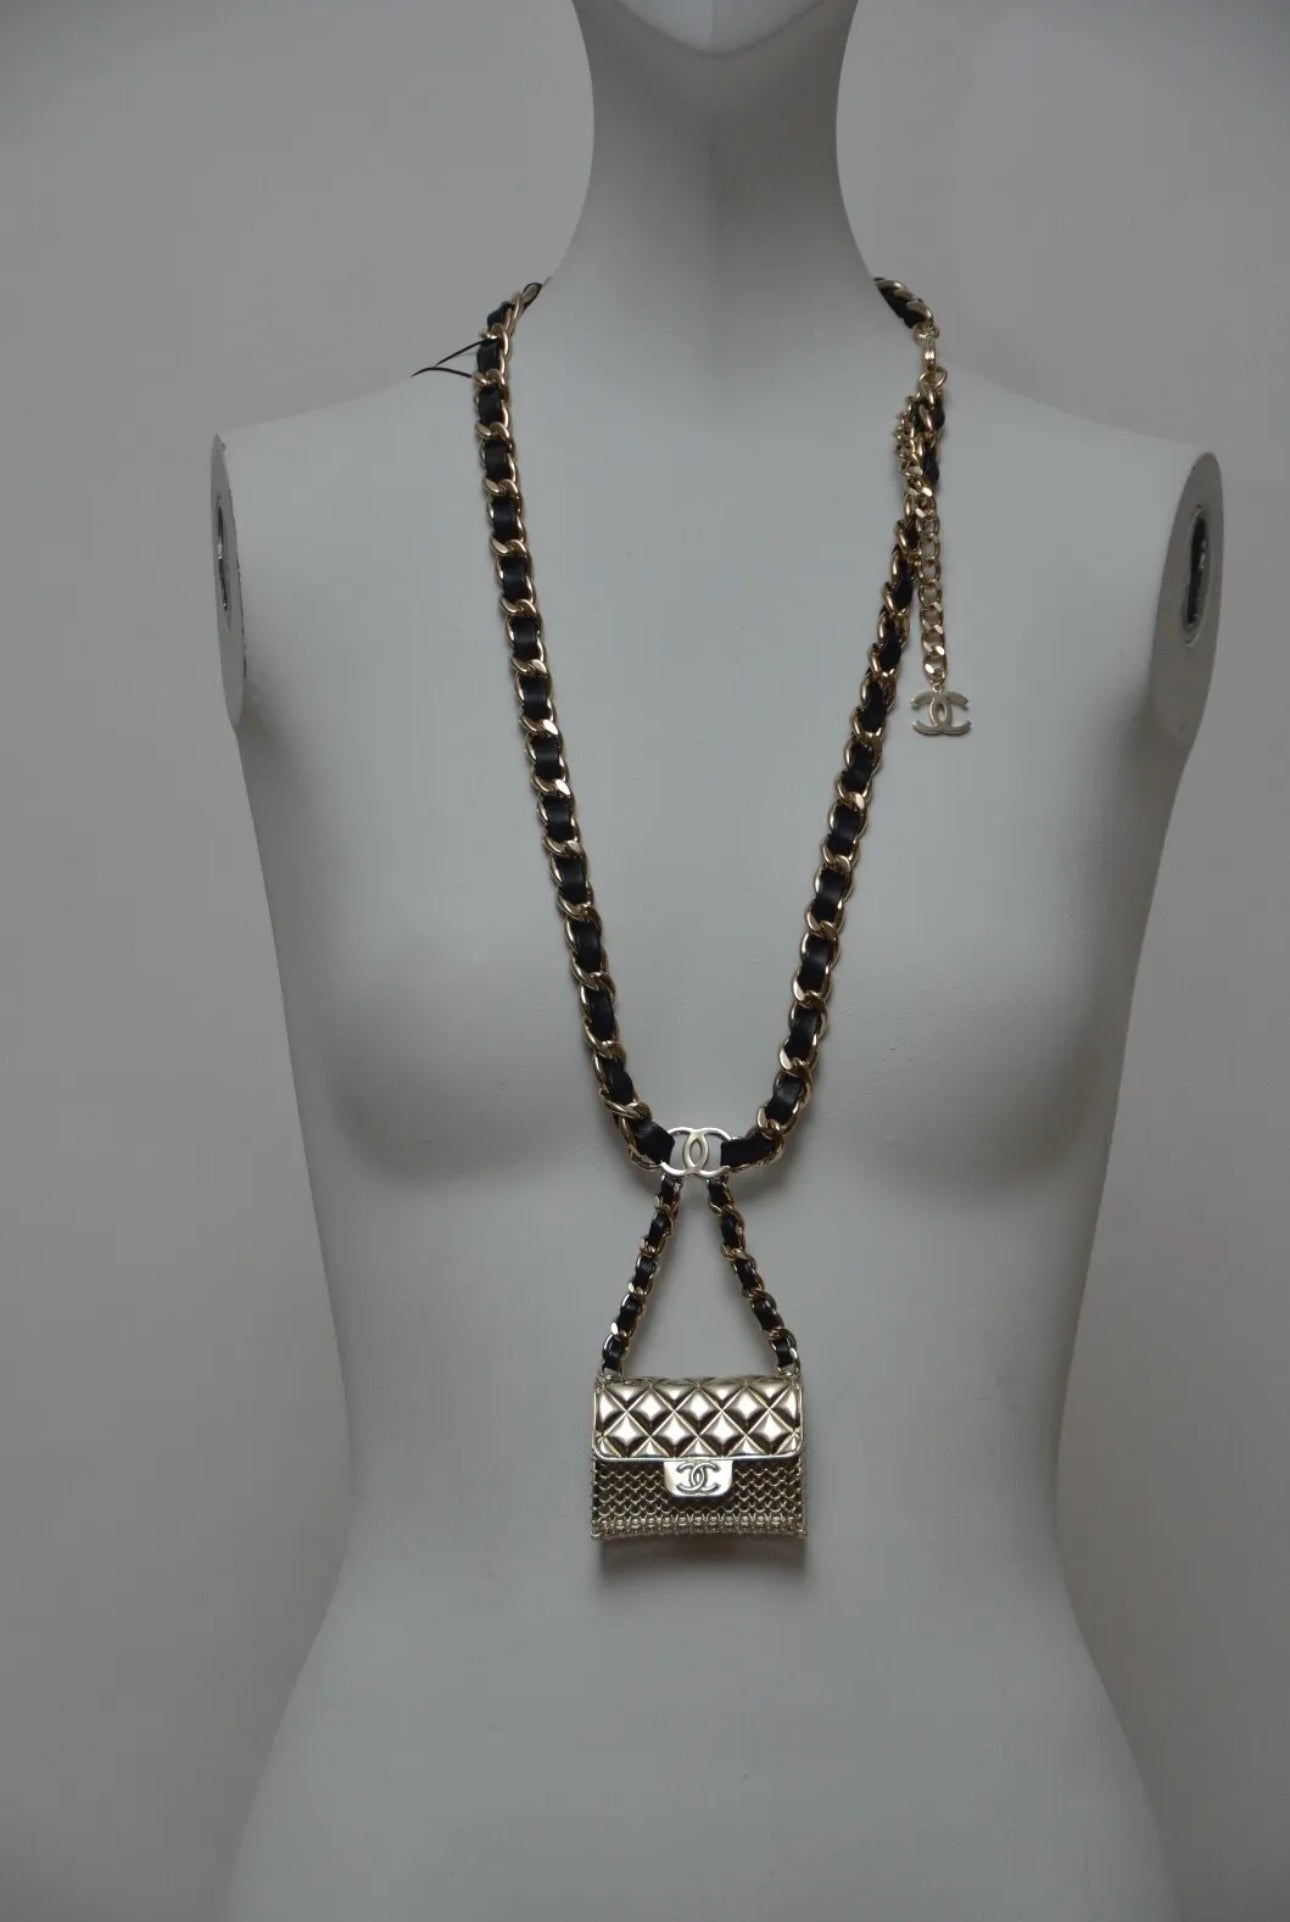 Coco Belt/Necklace with Mini Purse